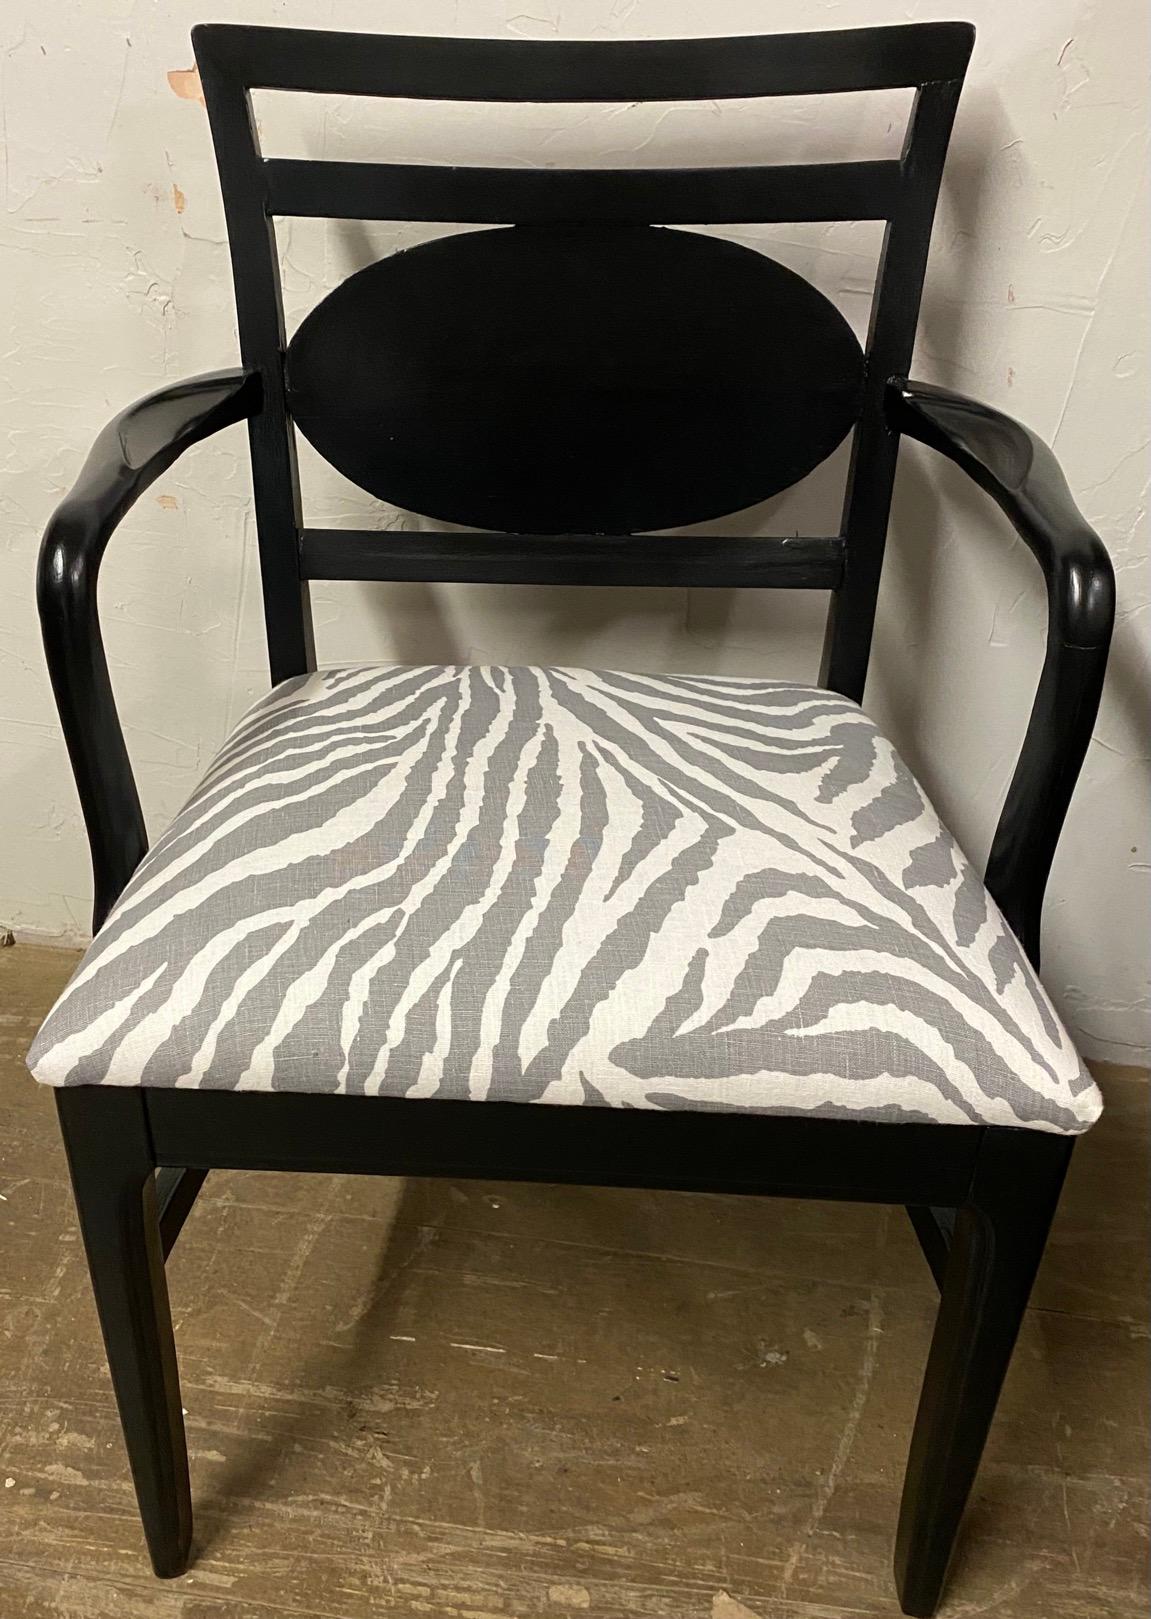 Stylish Art Deco style wood frame office or desk arm chair in black. Chair has a decorative oval medallion on the back and an upholstered seat covered in contemporary grey and white zebra stripes.
Search terms: Mid-Century Modern wood frame office